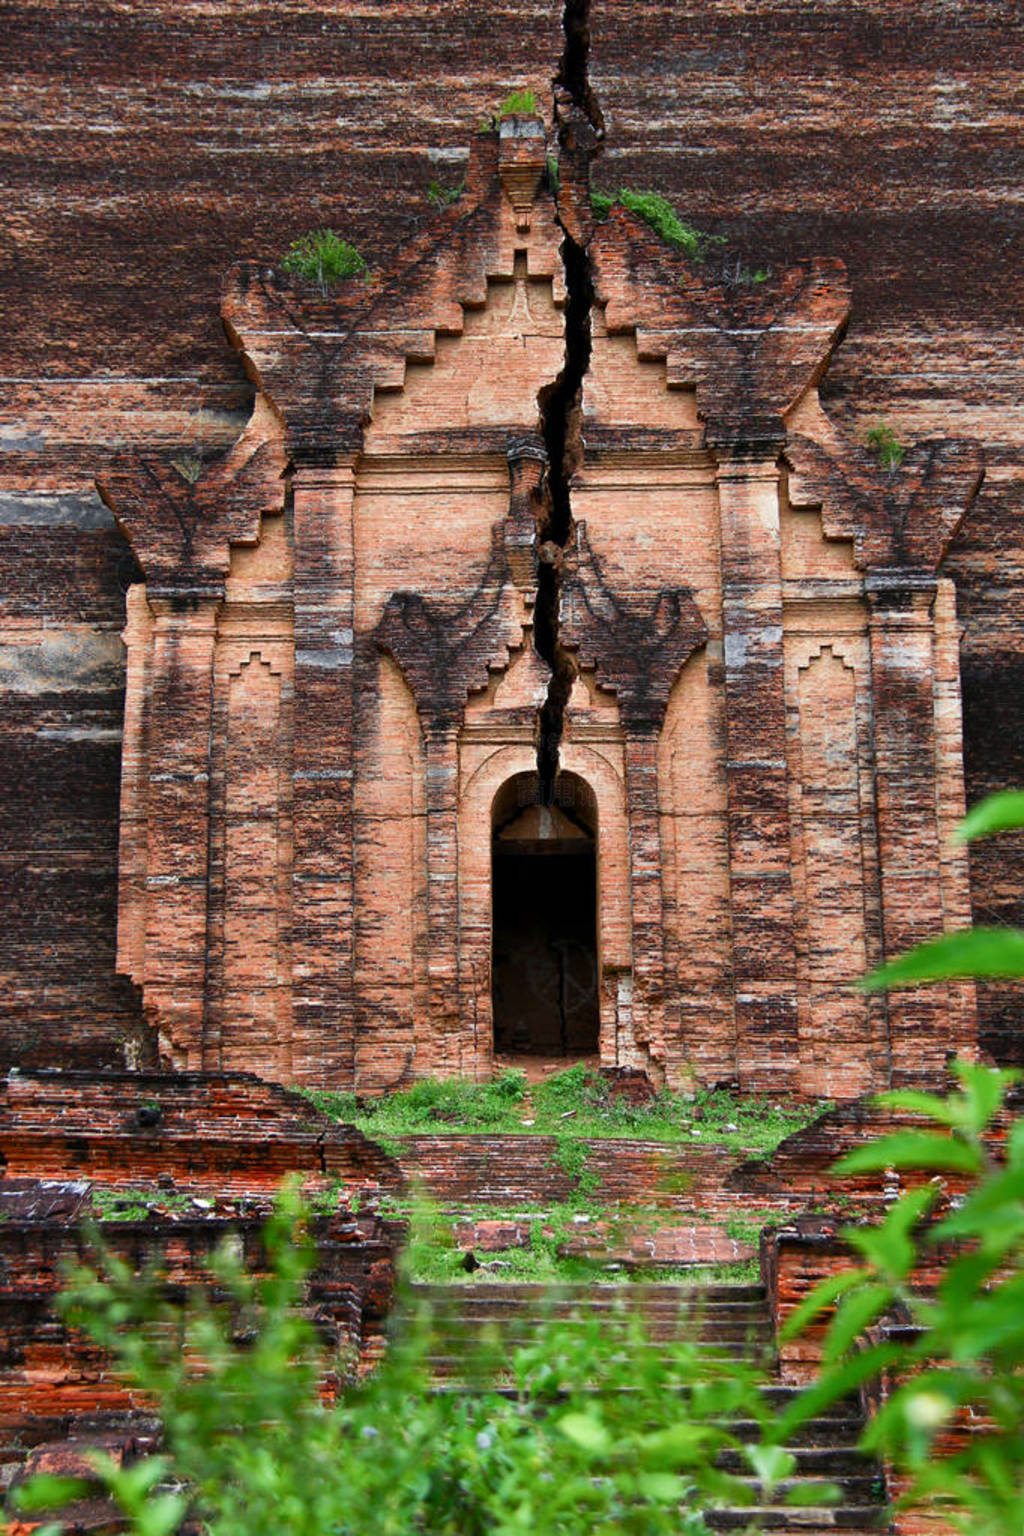 Big entrance with a huge crack of a temple at the